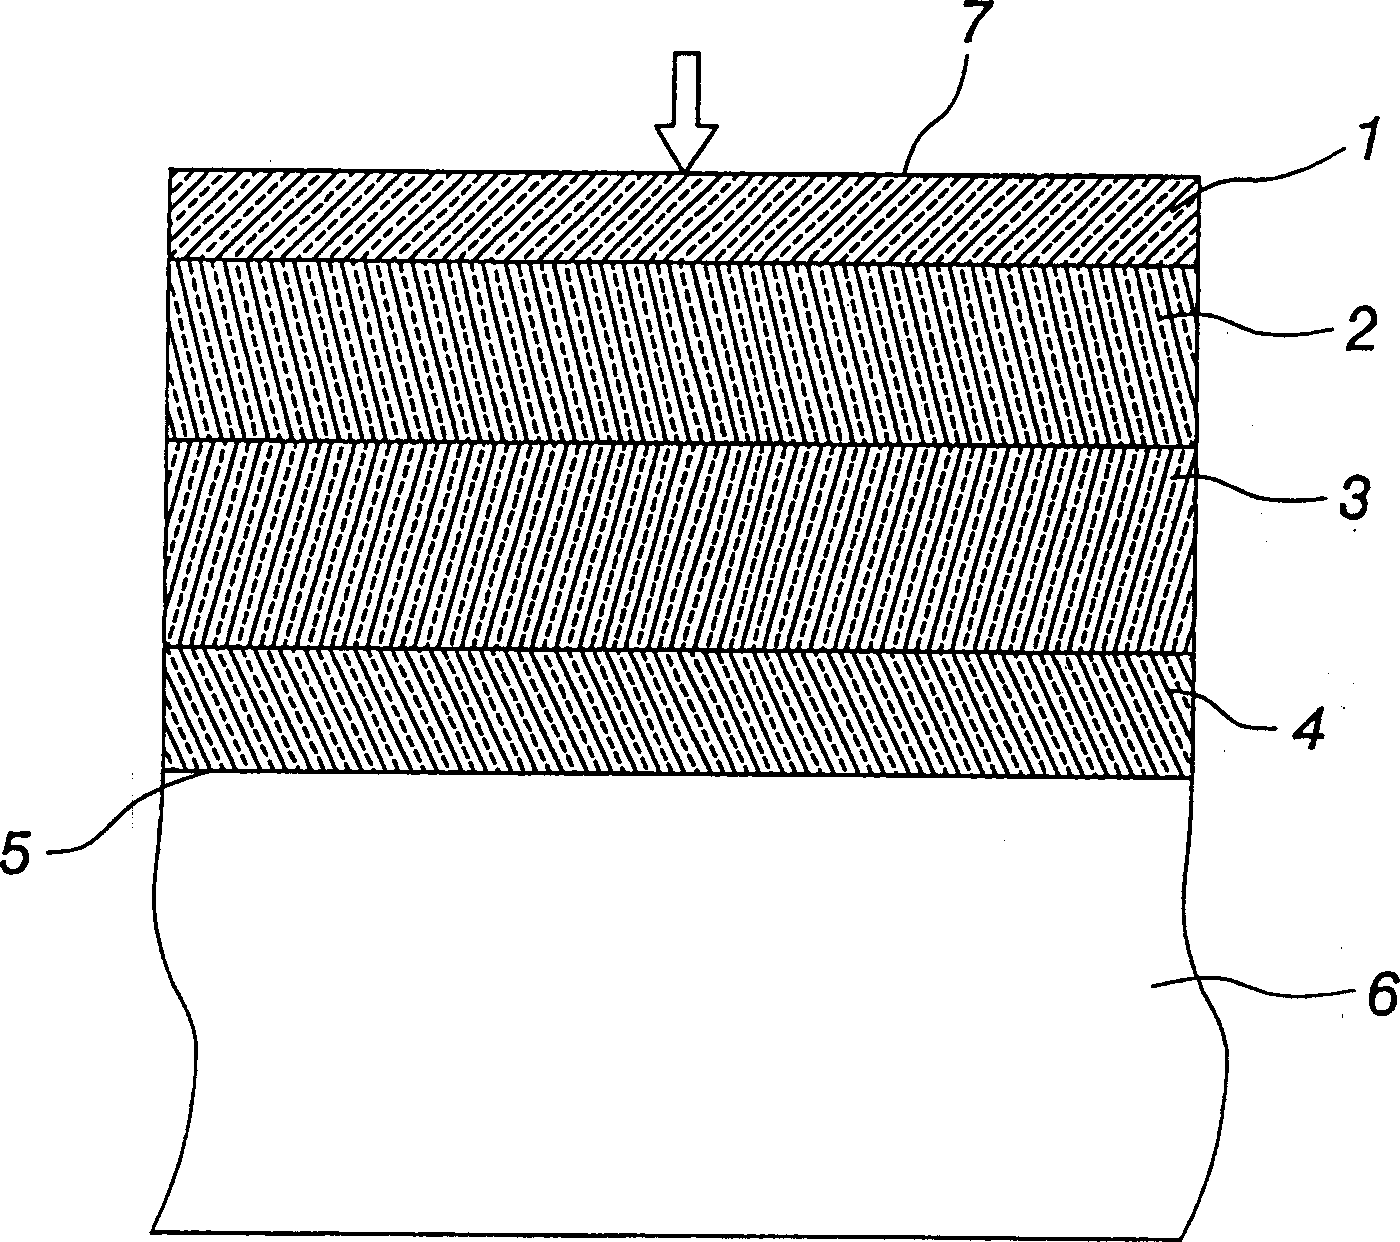 Anti-reflection coating layer with transparent electric surface layer